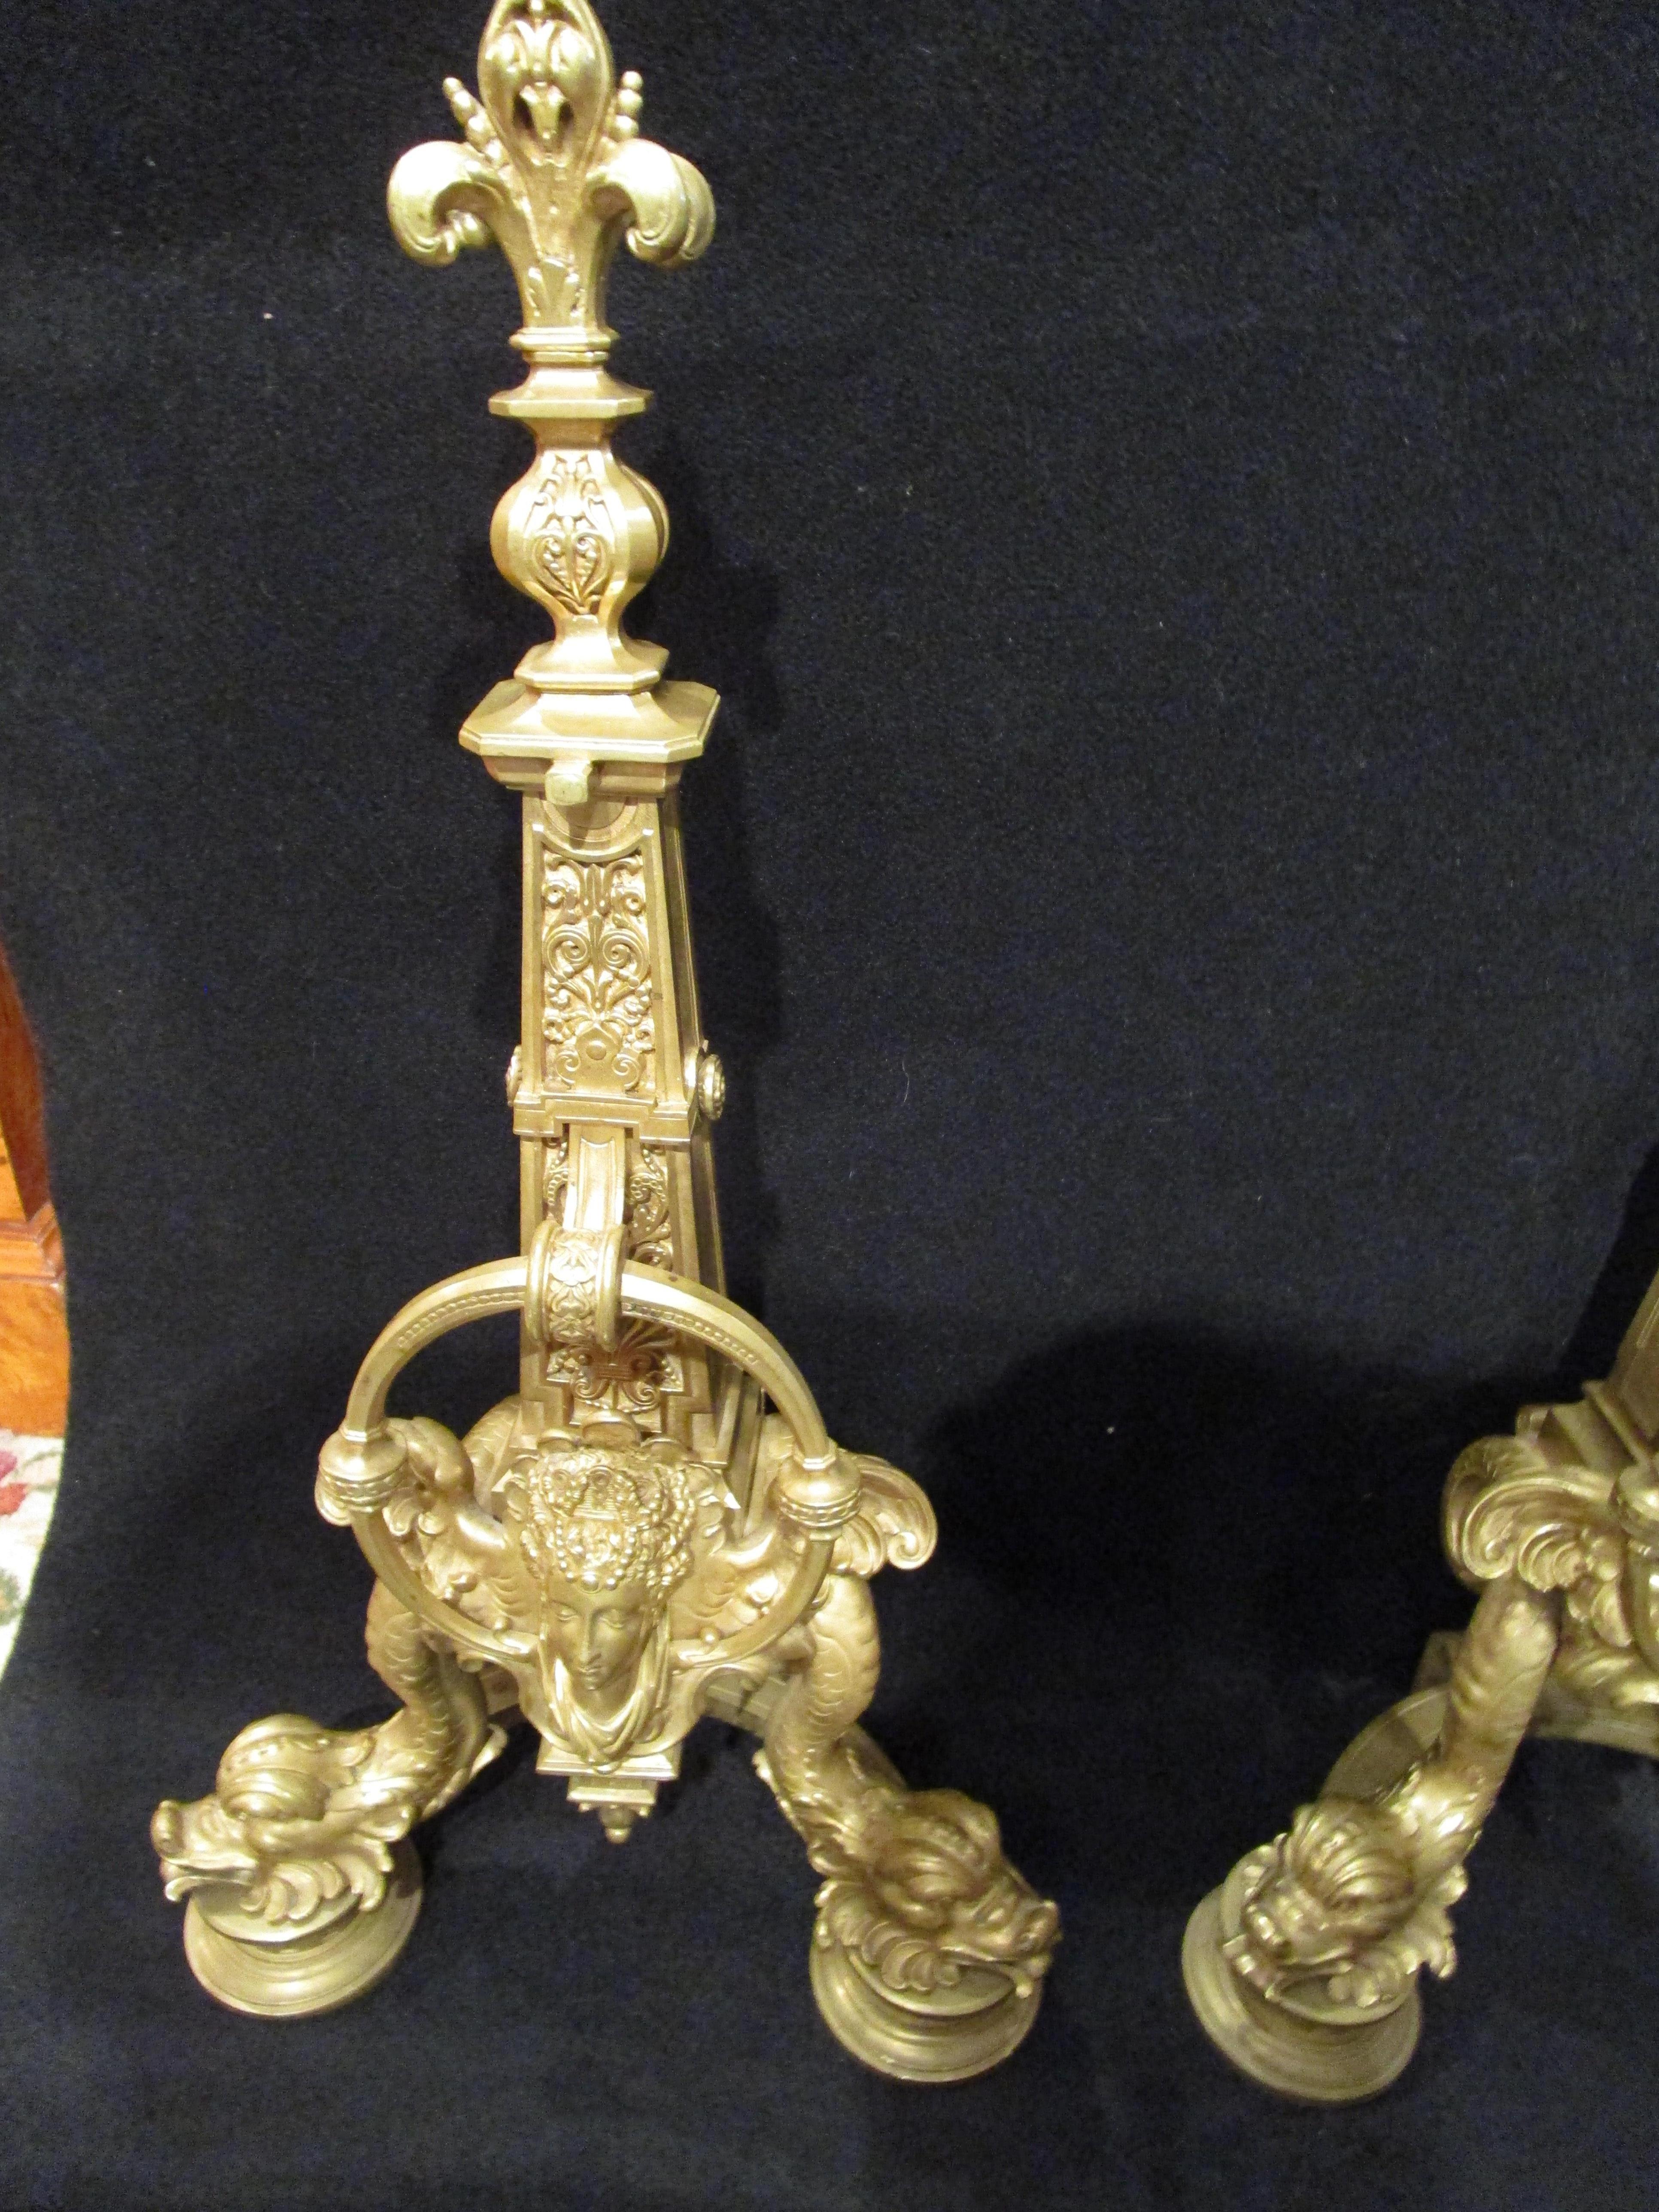 A fine pair of 19th century French Empire style gilt bronze chenets with dolphin feet.